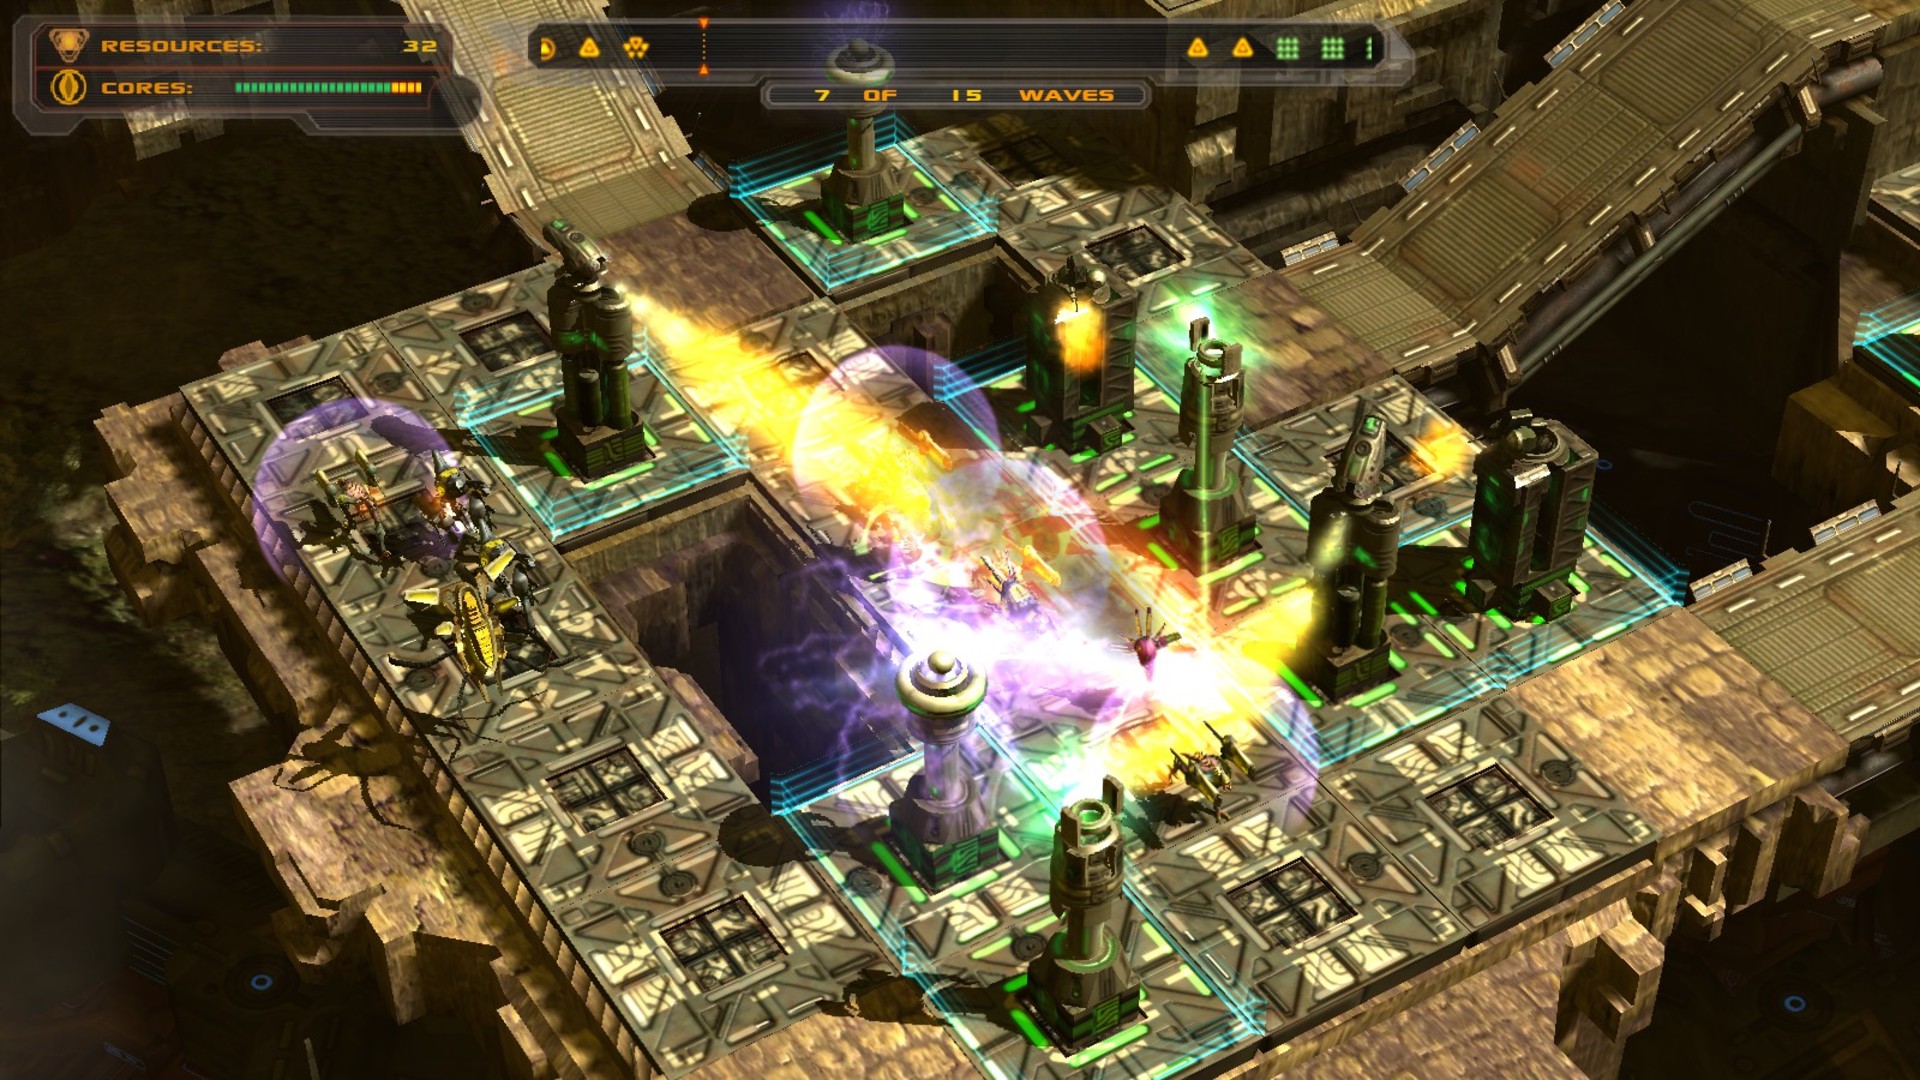 Best Tower Defense Game: Towers in a defense grid shoot flames at oncoming mechs.